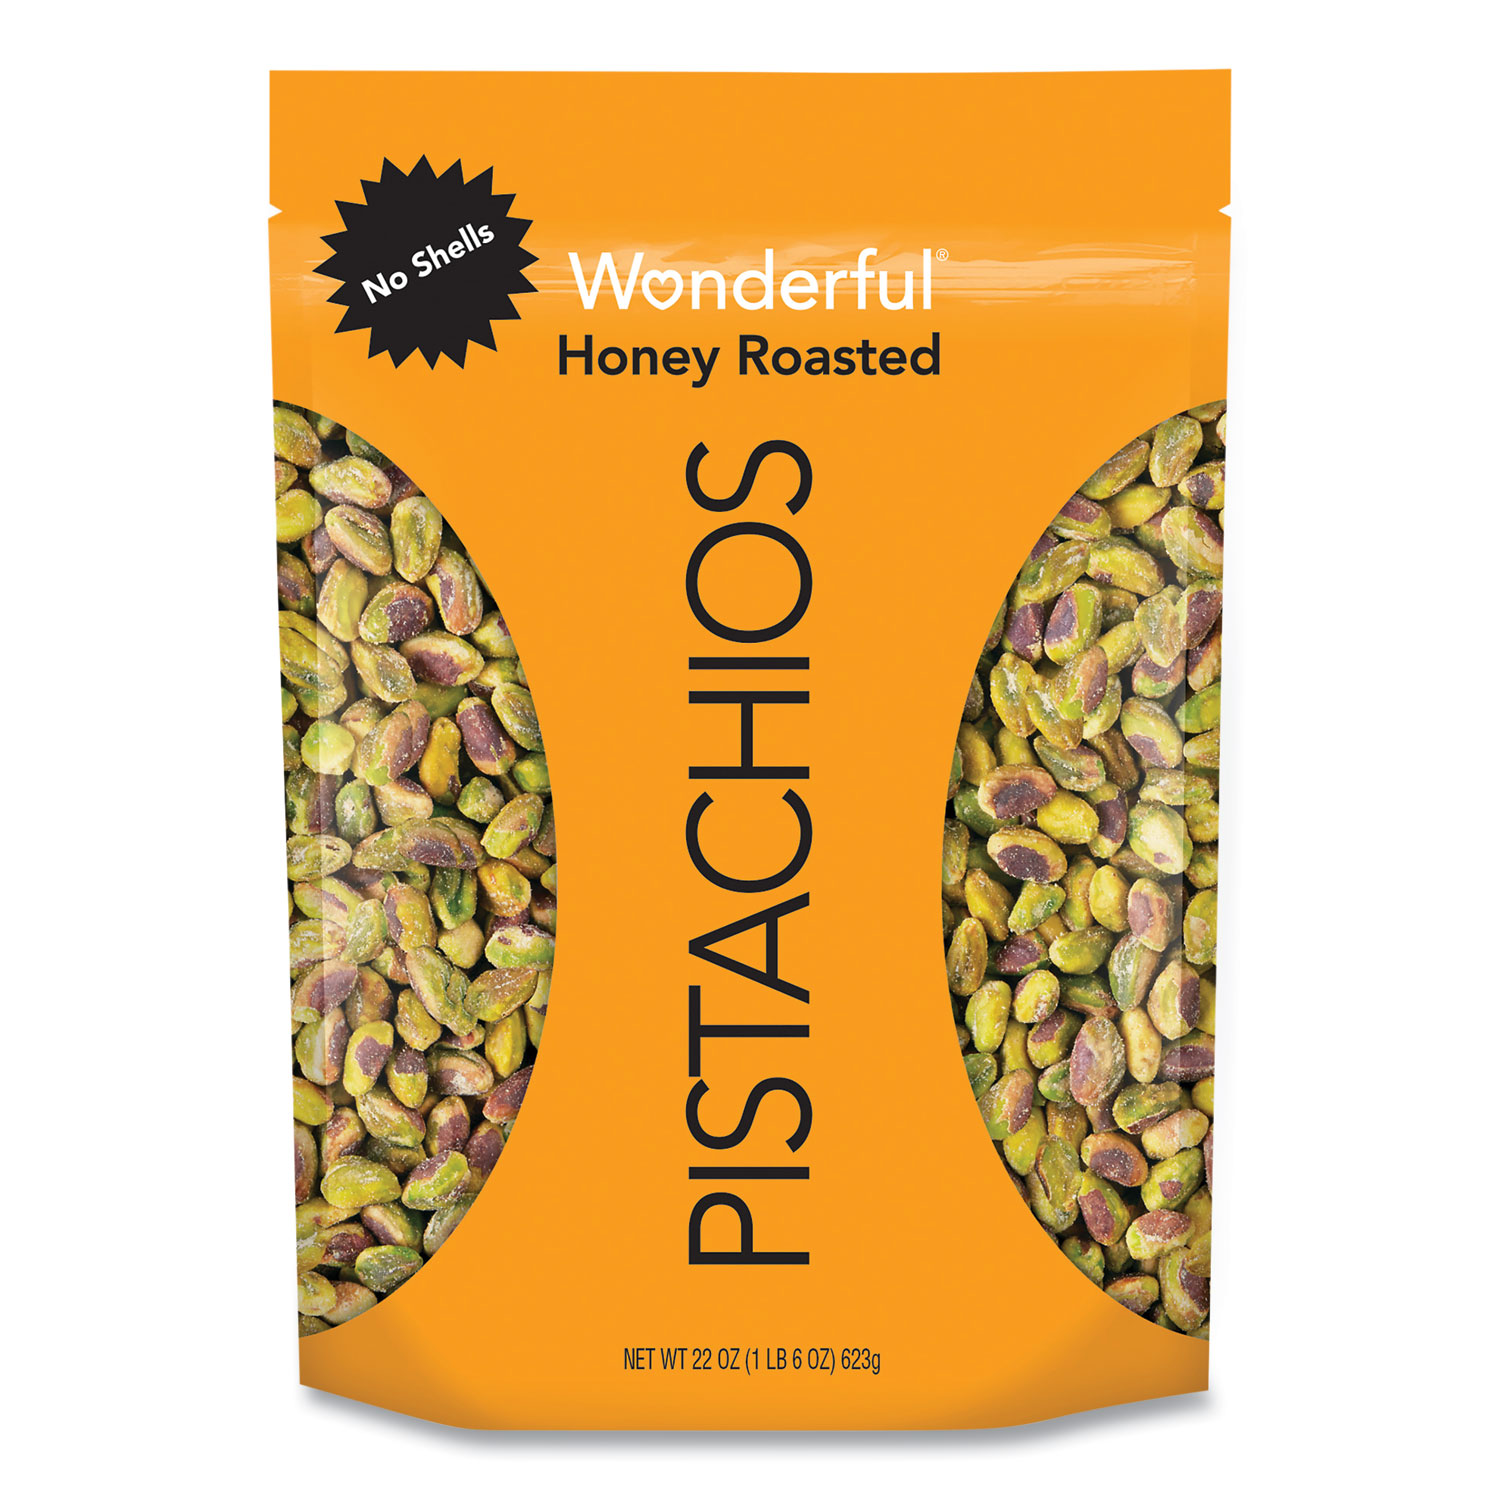  Wonderful 00009 No Shell Honey Roasted Pistachios, 22 oz Bag, Free Delivery in 1-4 Business Days (GRR22001163) 